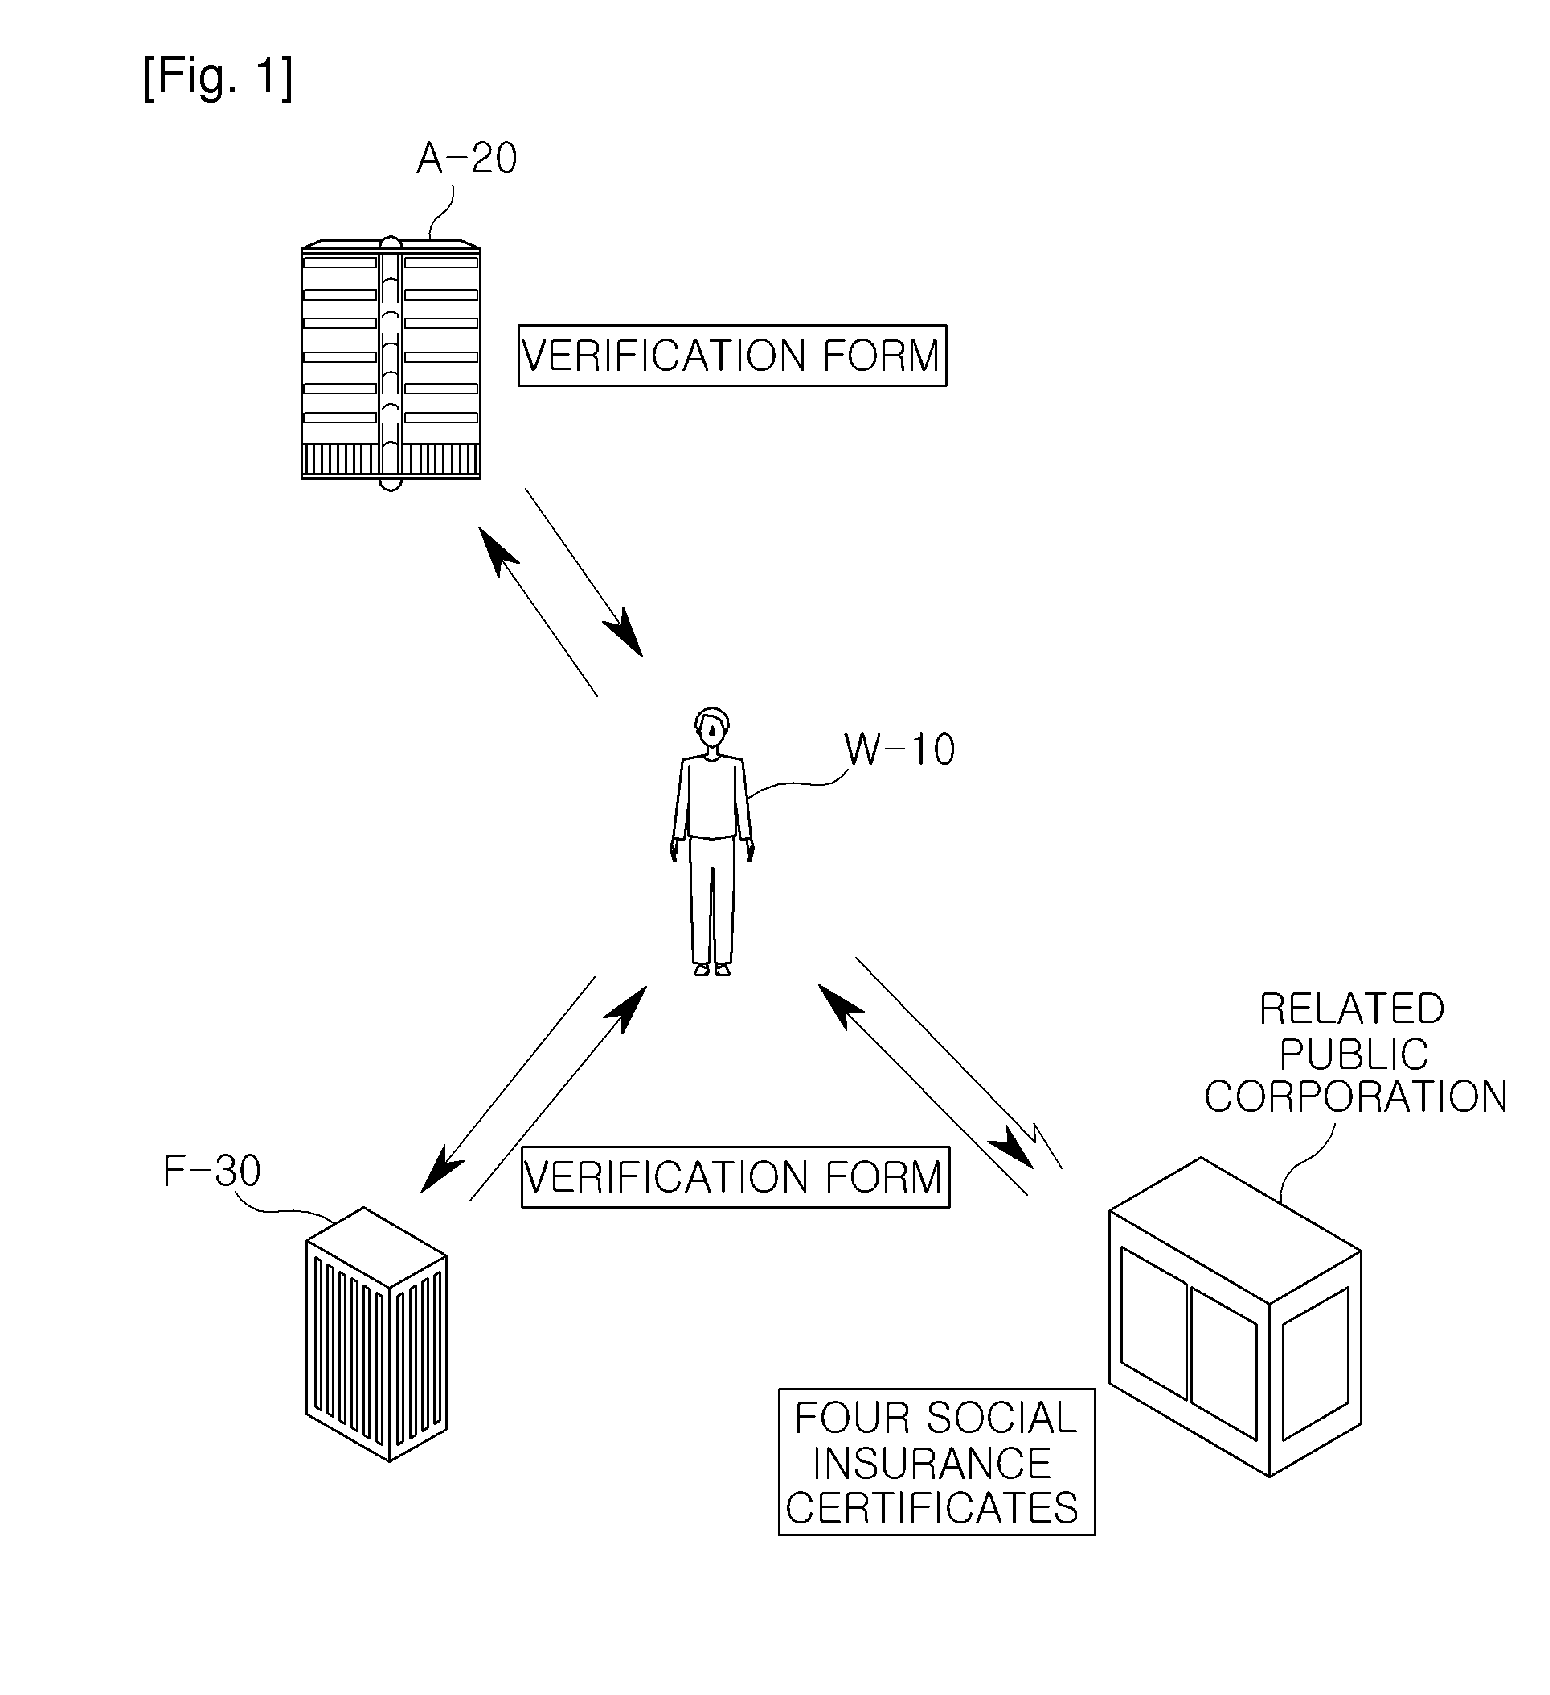 Career authentication system, career authentication method using the same, and recording medium having program stored therein to execute career authentication method